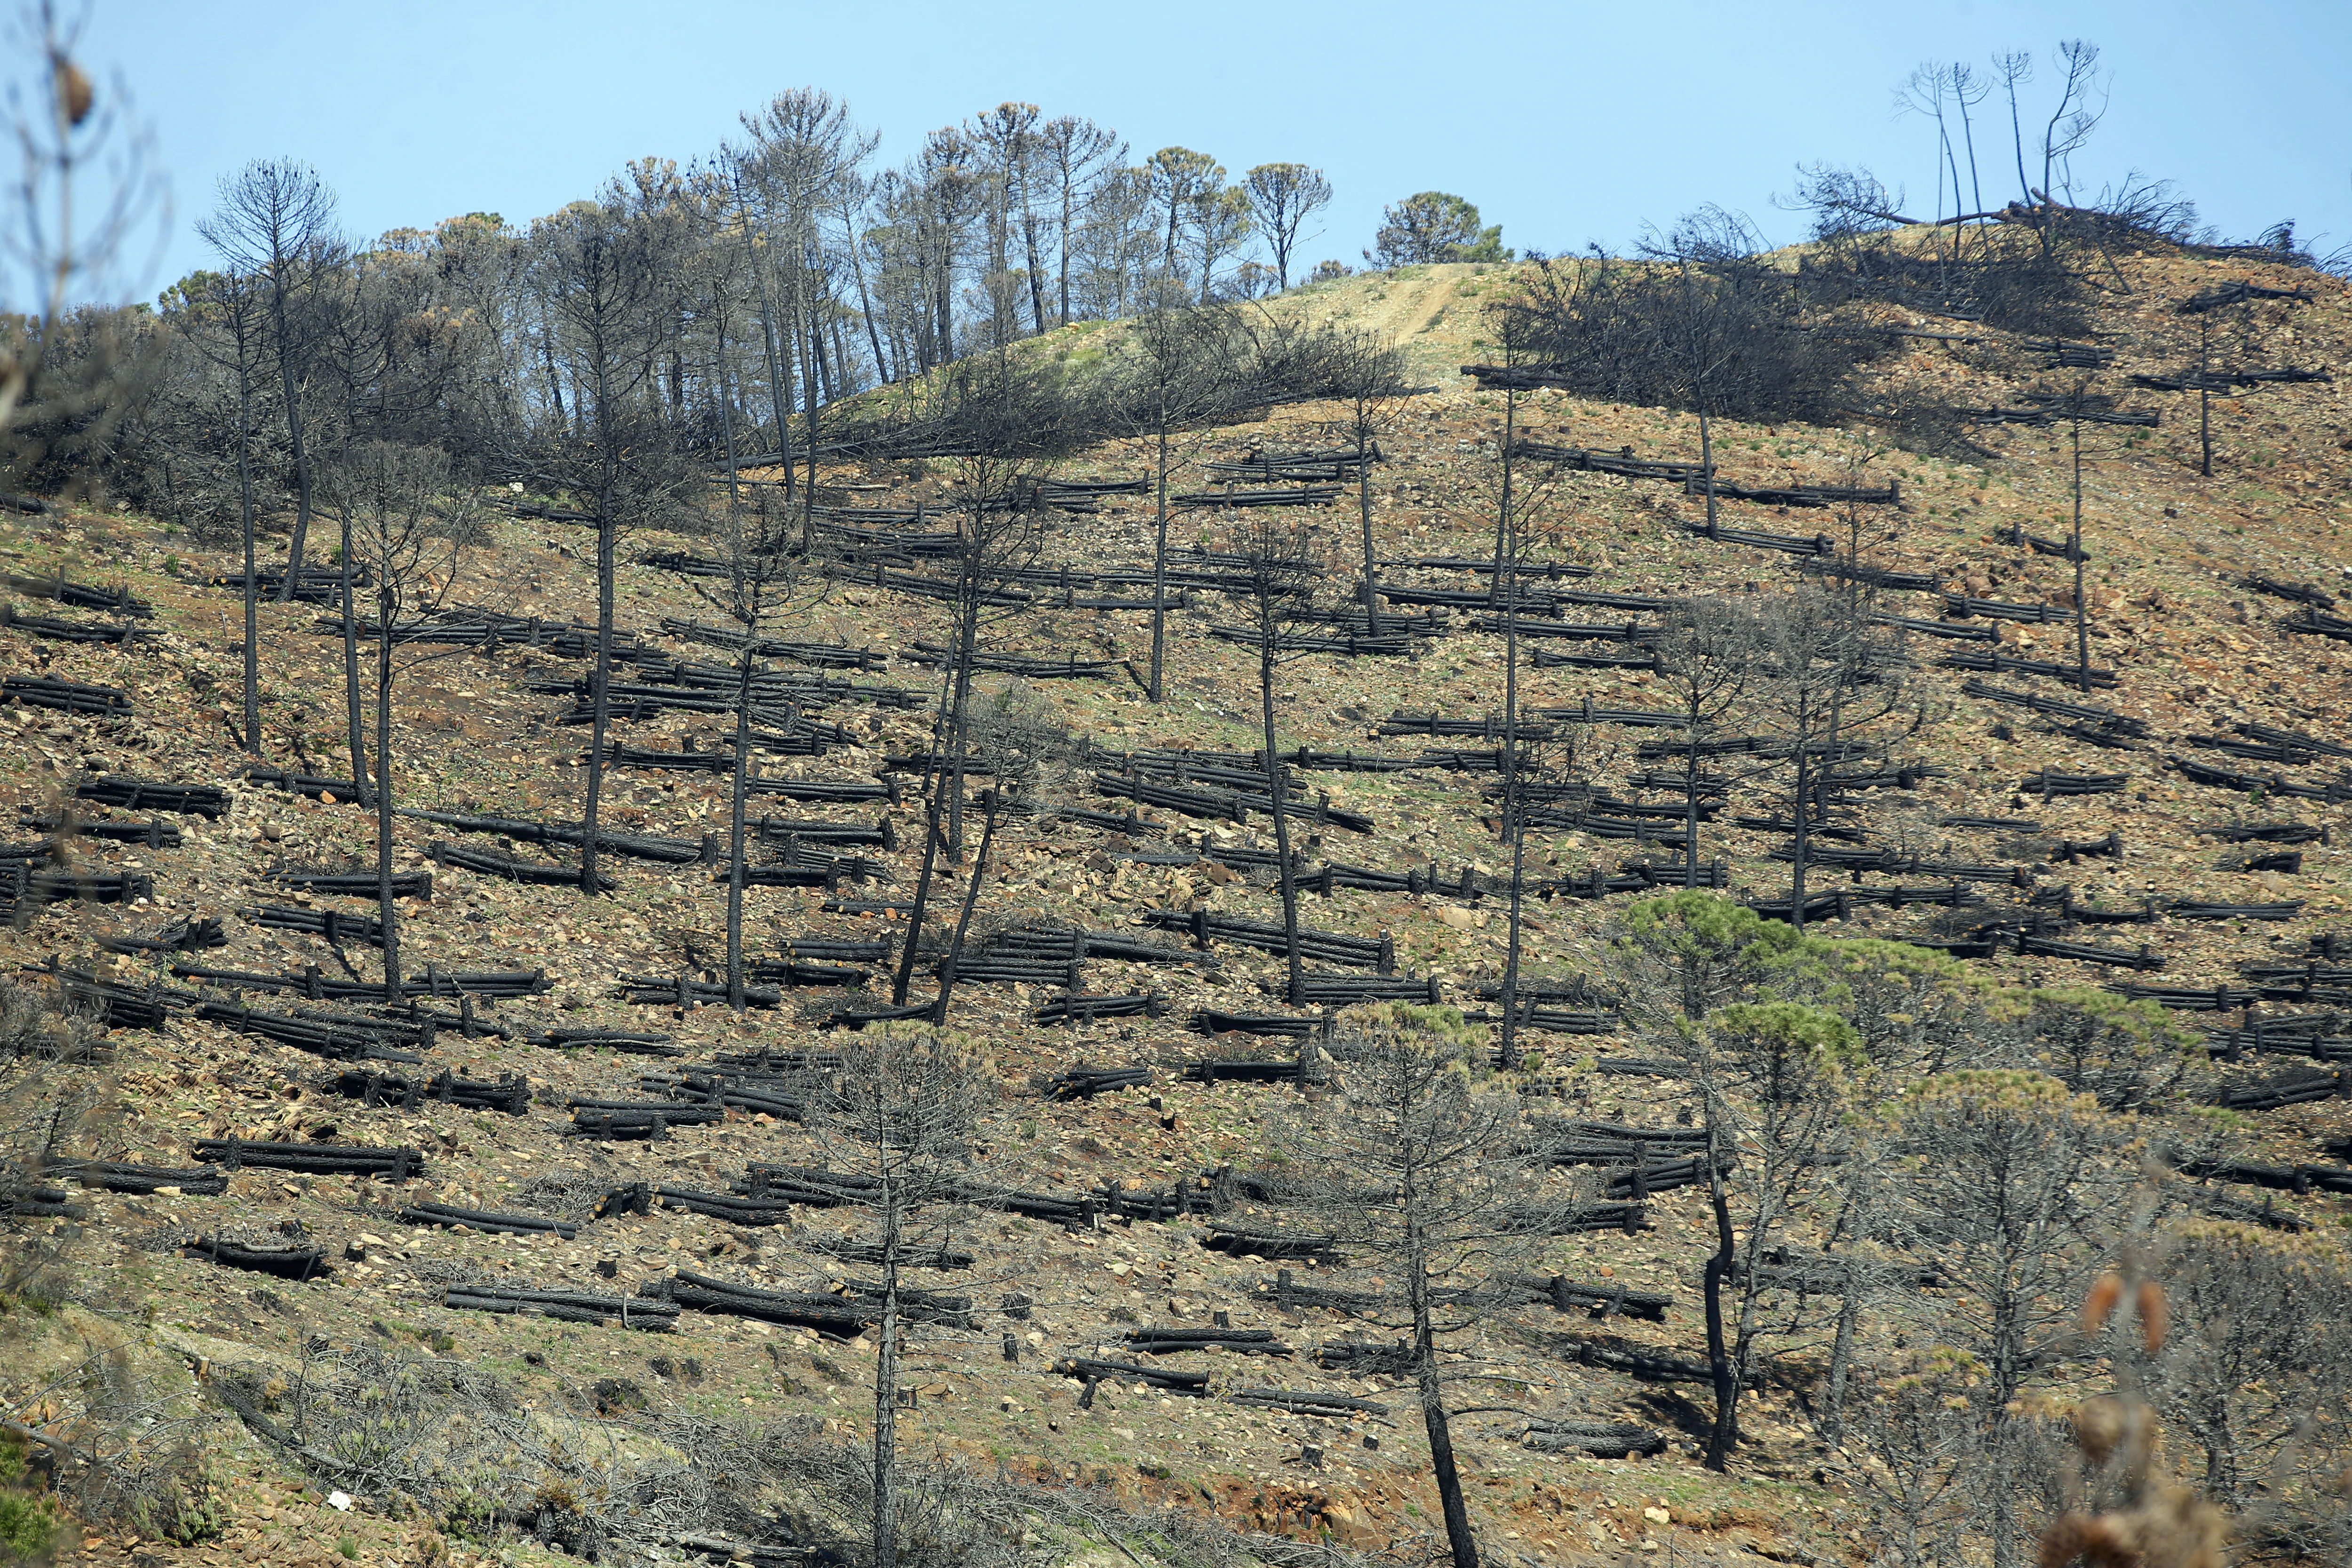 More than 9,000 hectares of woodland were destroyed by last year's fire. A visit to the area, six months later, shows how nature is starting to make a recovery in the Genal Valley